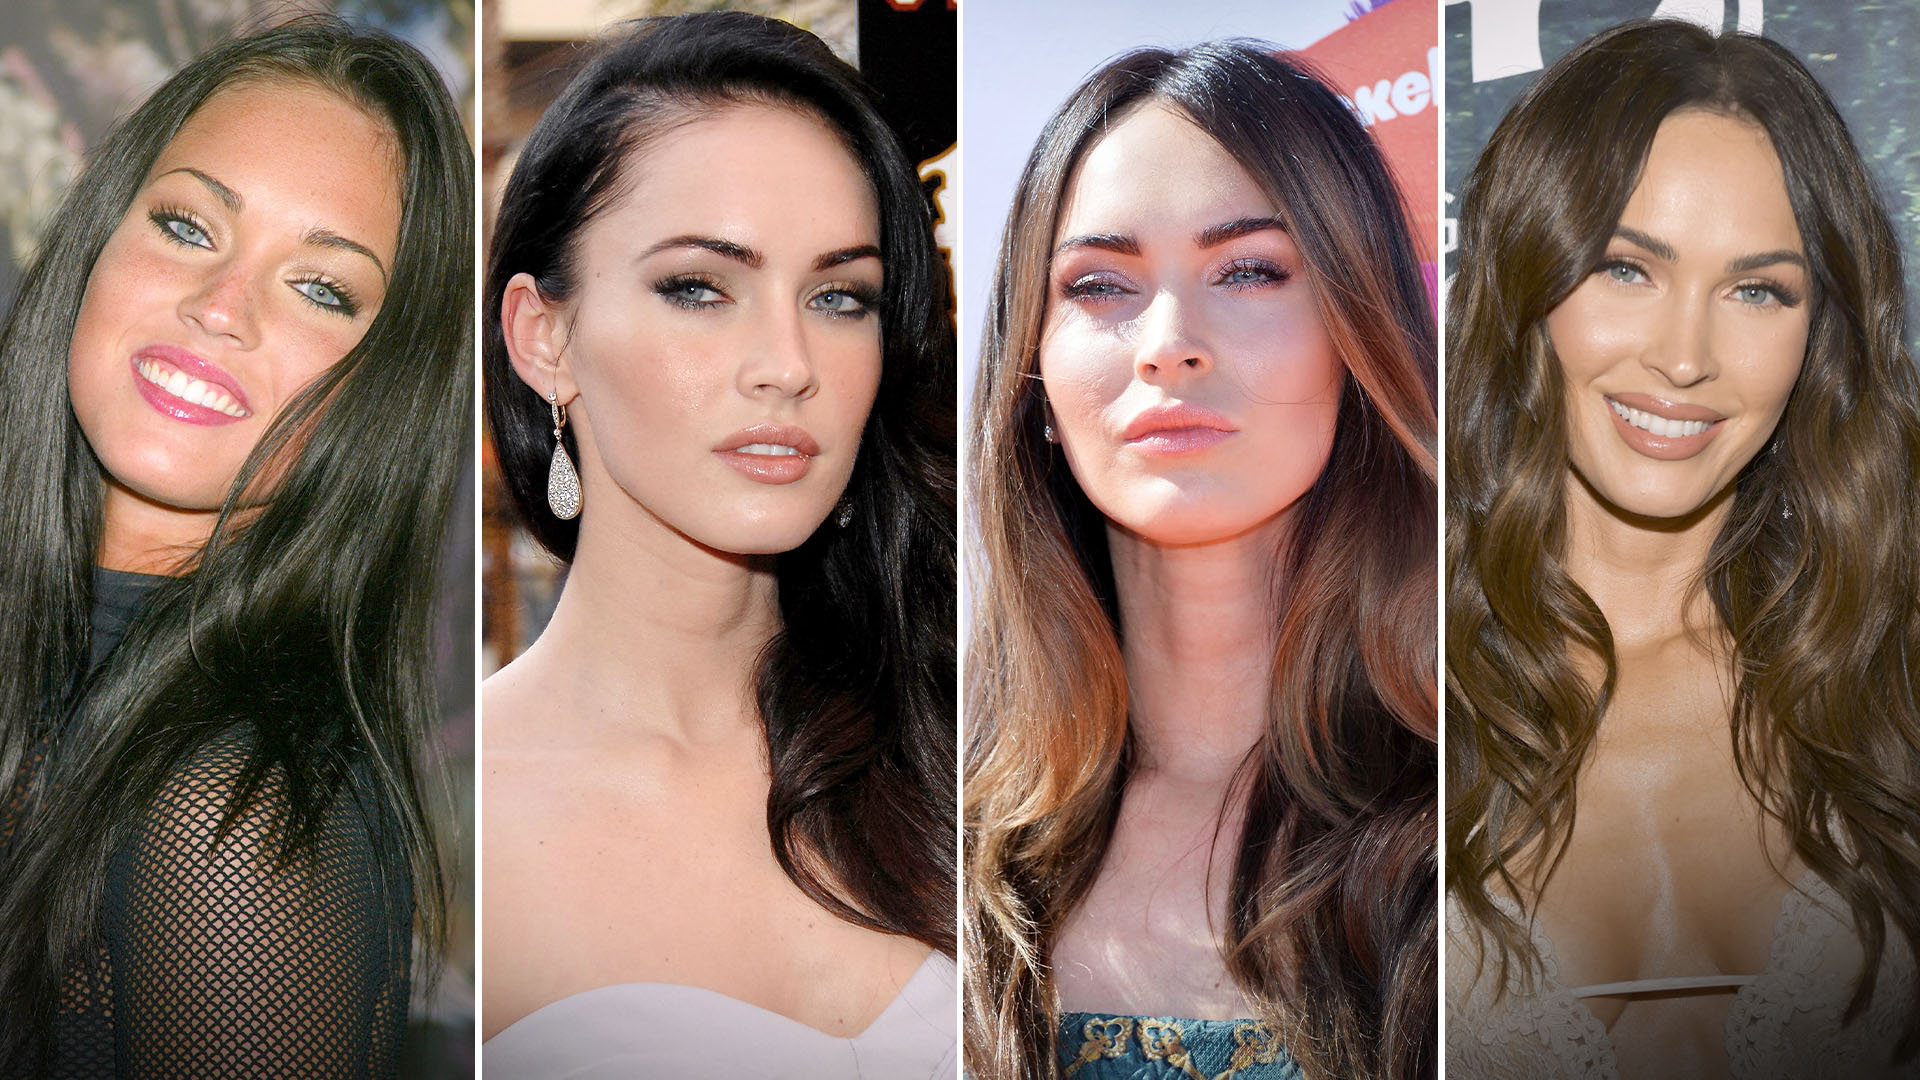 Megan Fox, at different times in her career